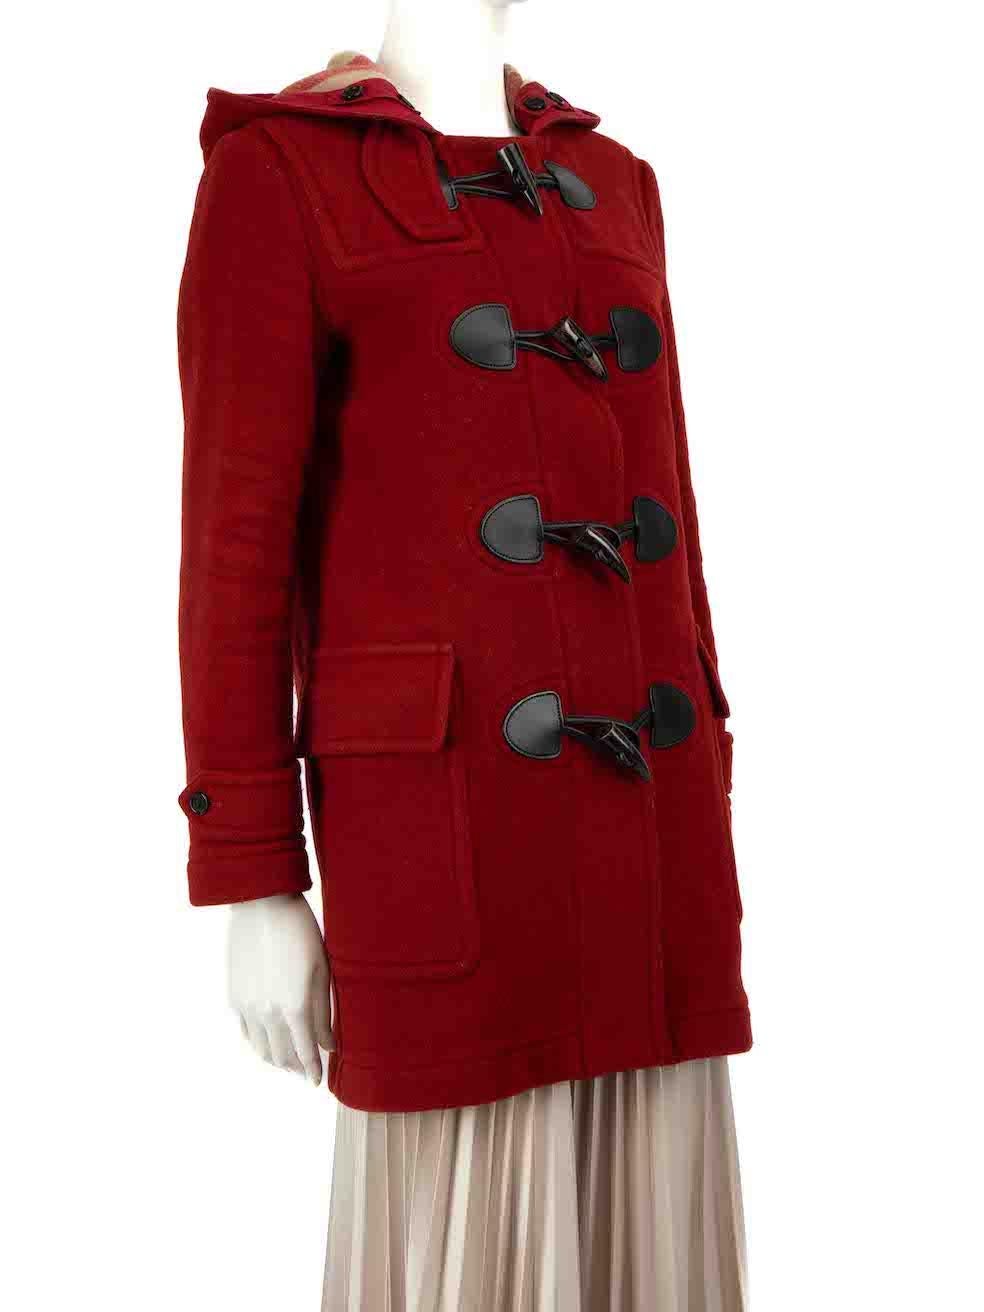 CONDITION is Good. General wear to coat is evident. Moderate signs of wear to the overall surface with pilling and wearing away to the felted texture on this used Burberry designer resale item.
 
Details
The Mersey model
Red
Wool
Peacoat
Mid